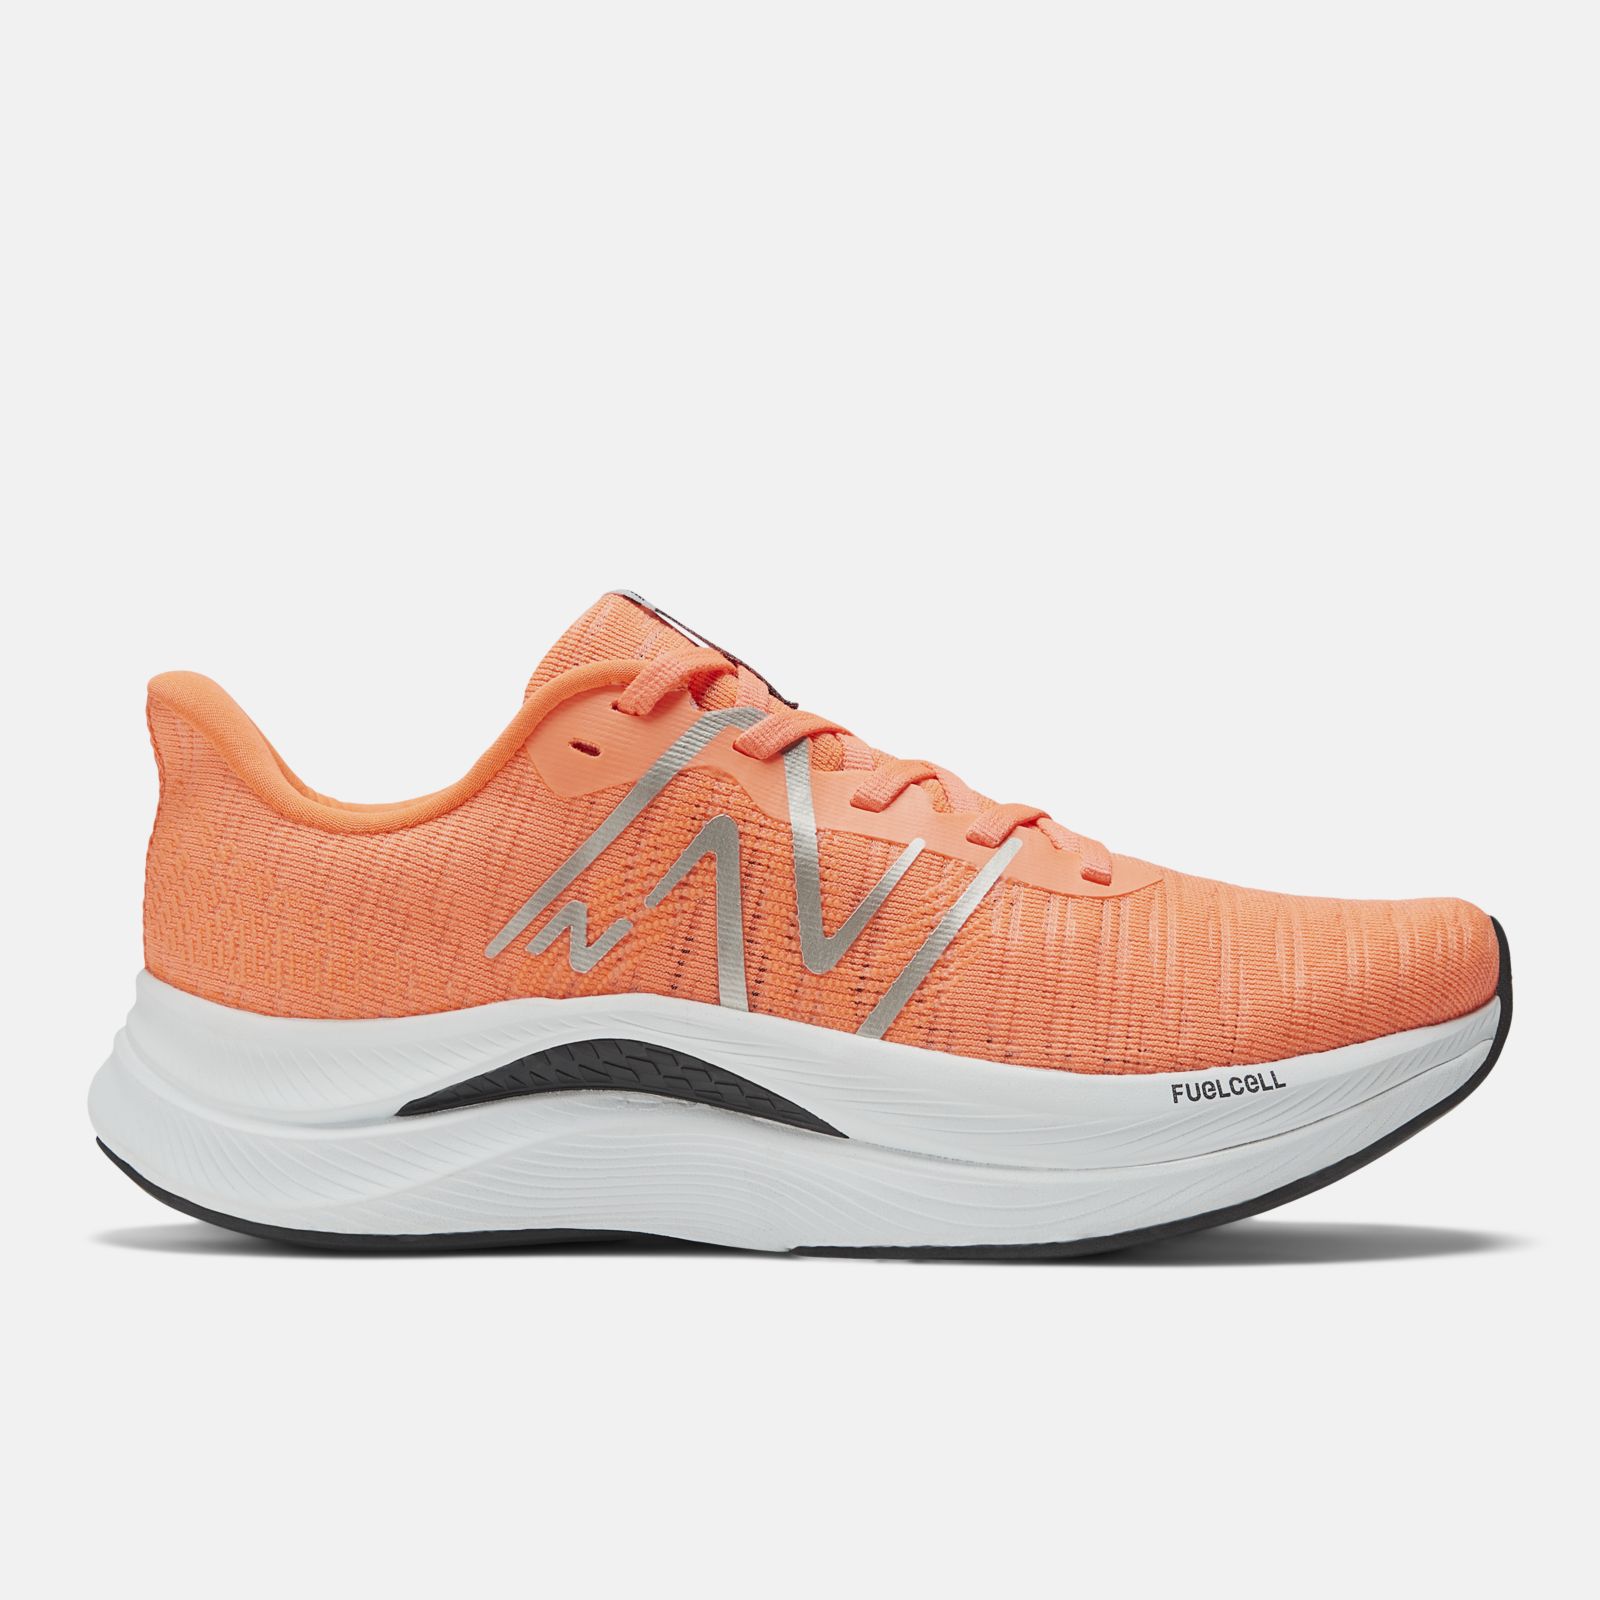 New Balance FuelCell Propel v4, Neon/Dragonfly, swatch